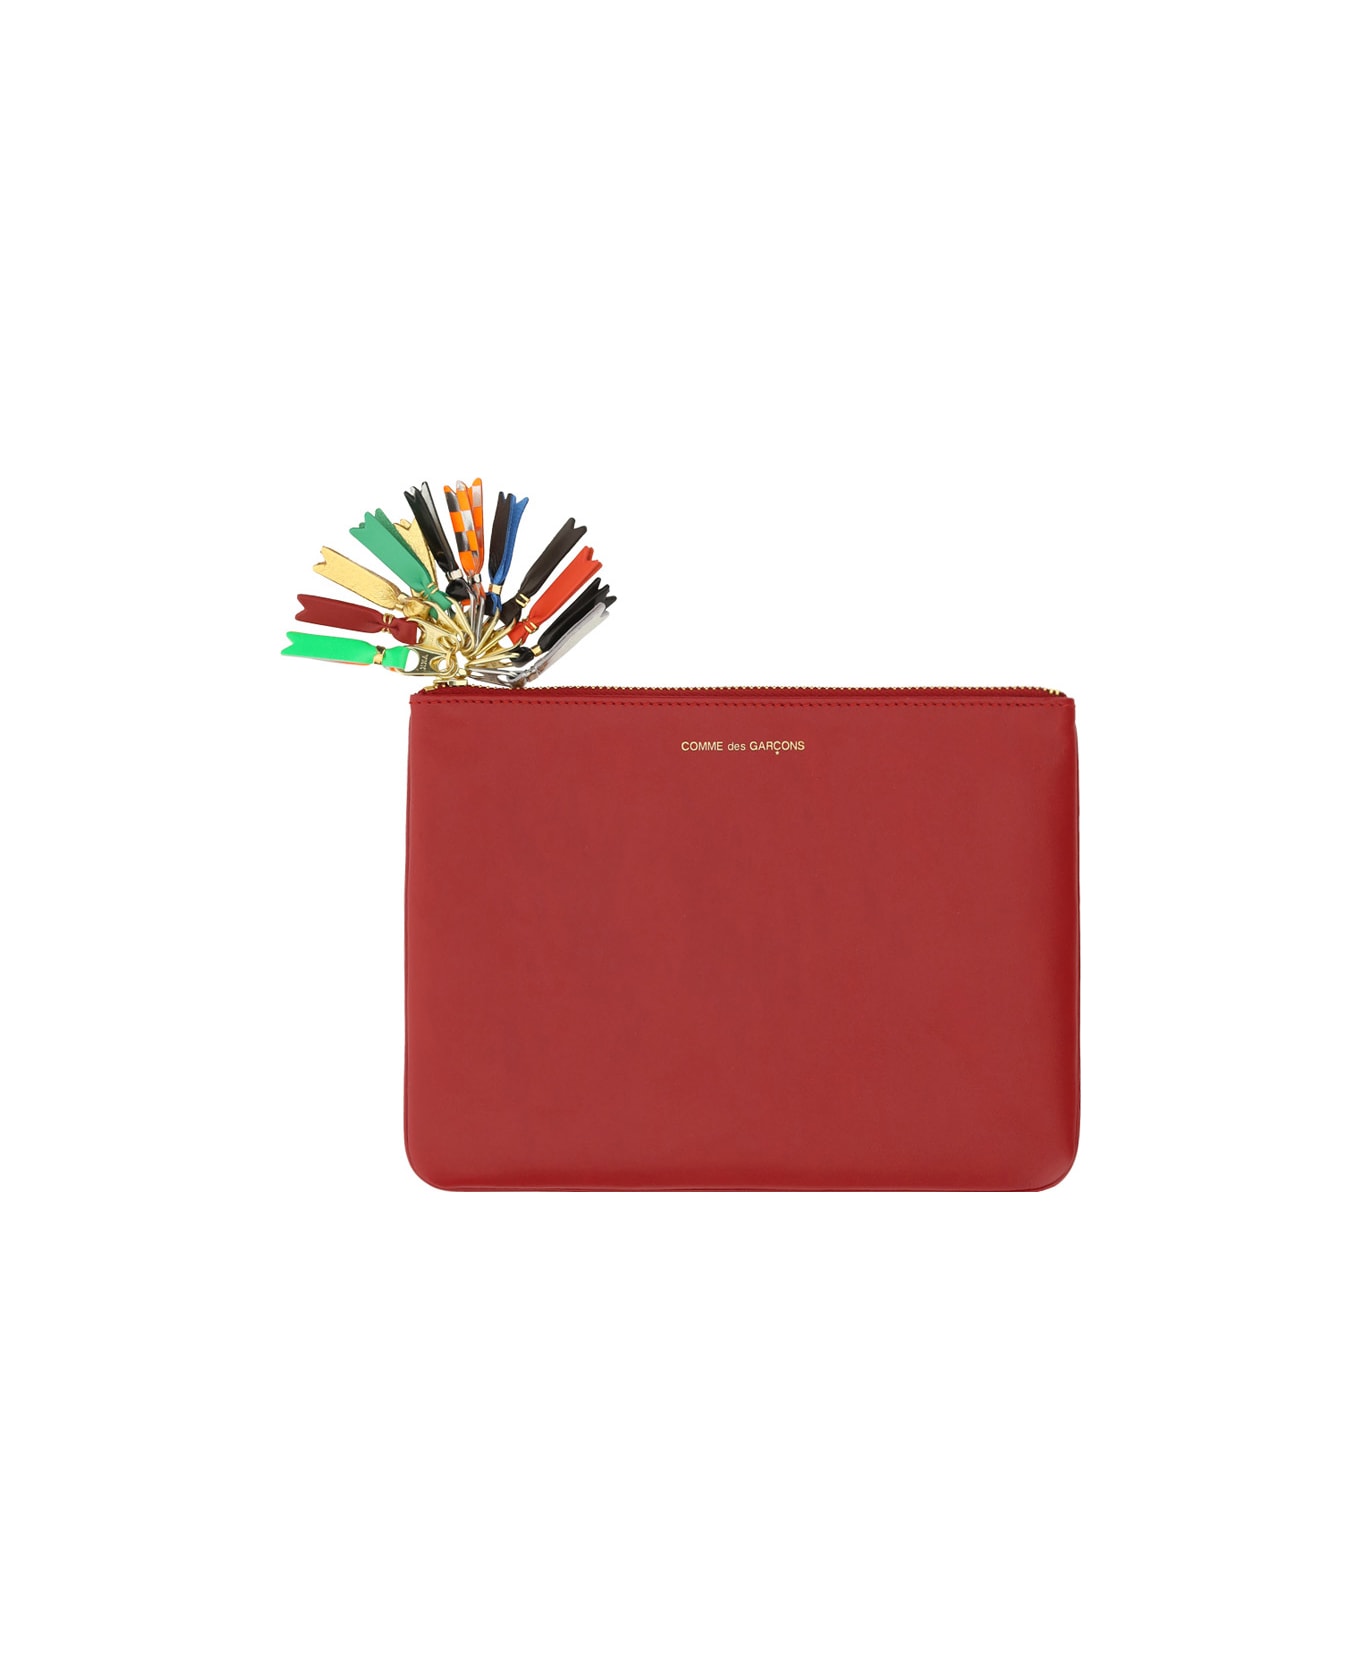 We partner with Italys best luxury retailers and work together with them to provide you Wallet Coin Purse - Red